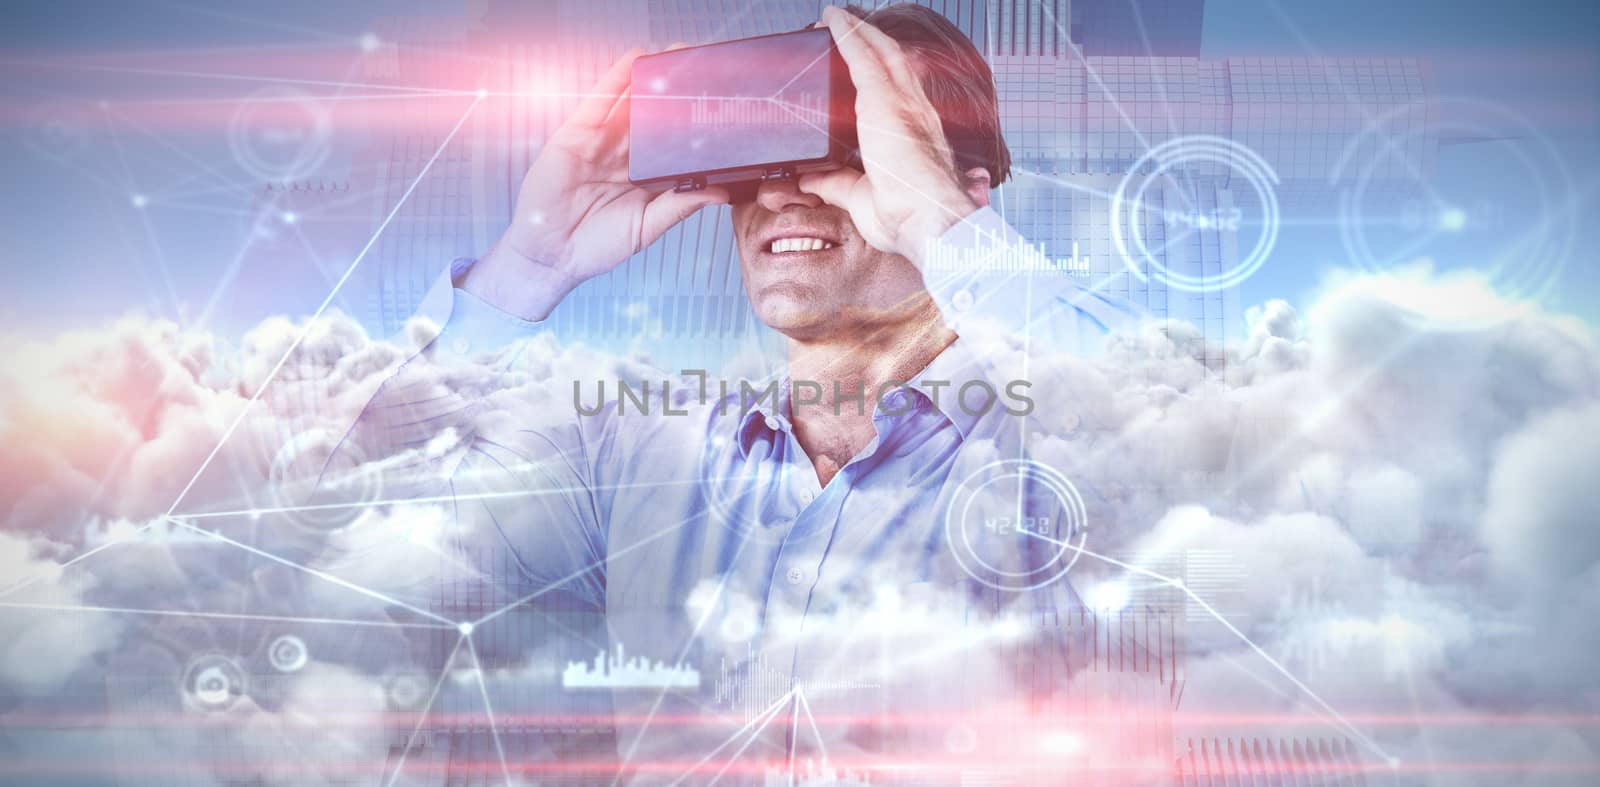 Smiling businessman in blue shirt wearing vr glasses against composite image of interface connecting lines over clouds 